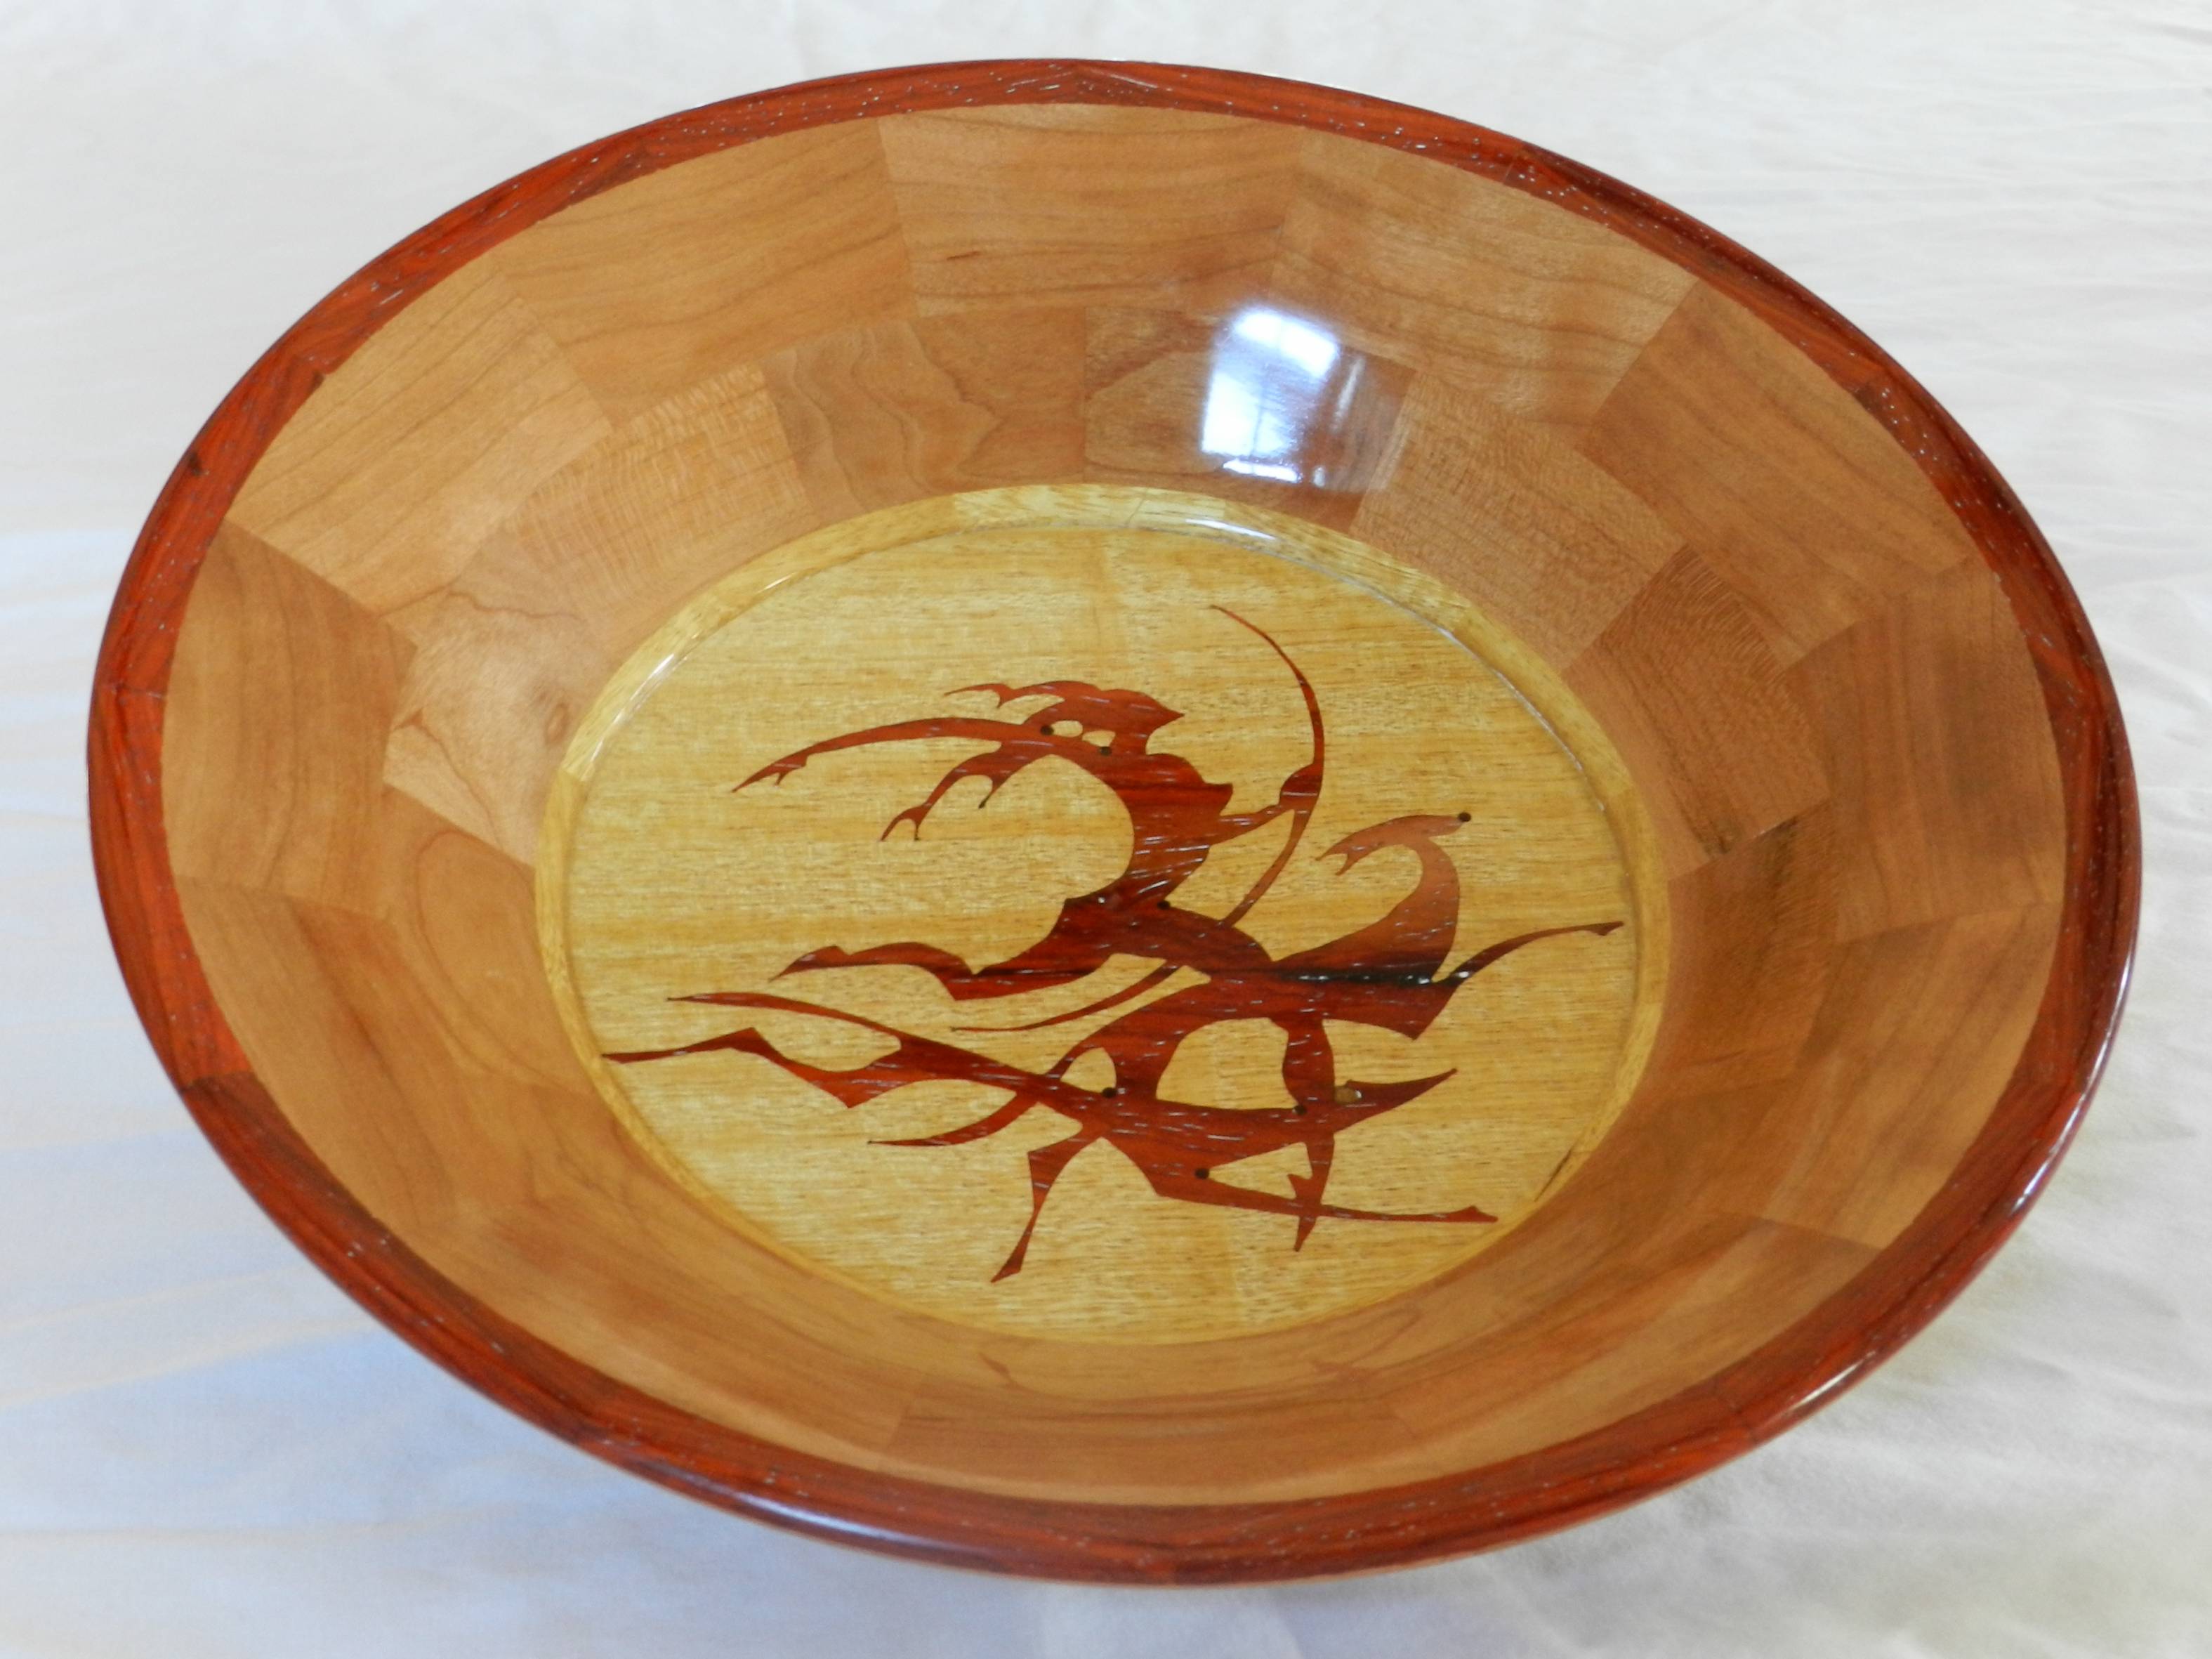 Segmented bowl with inlay